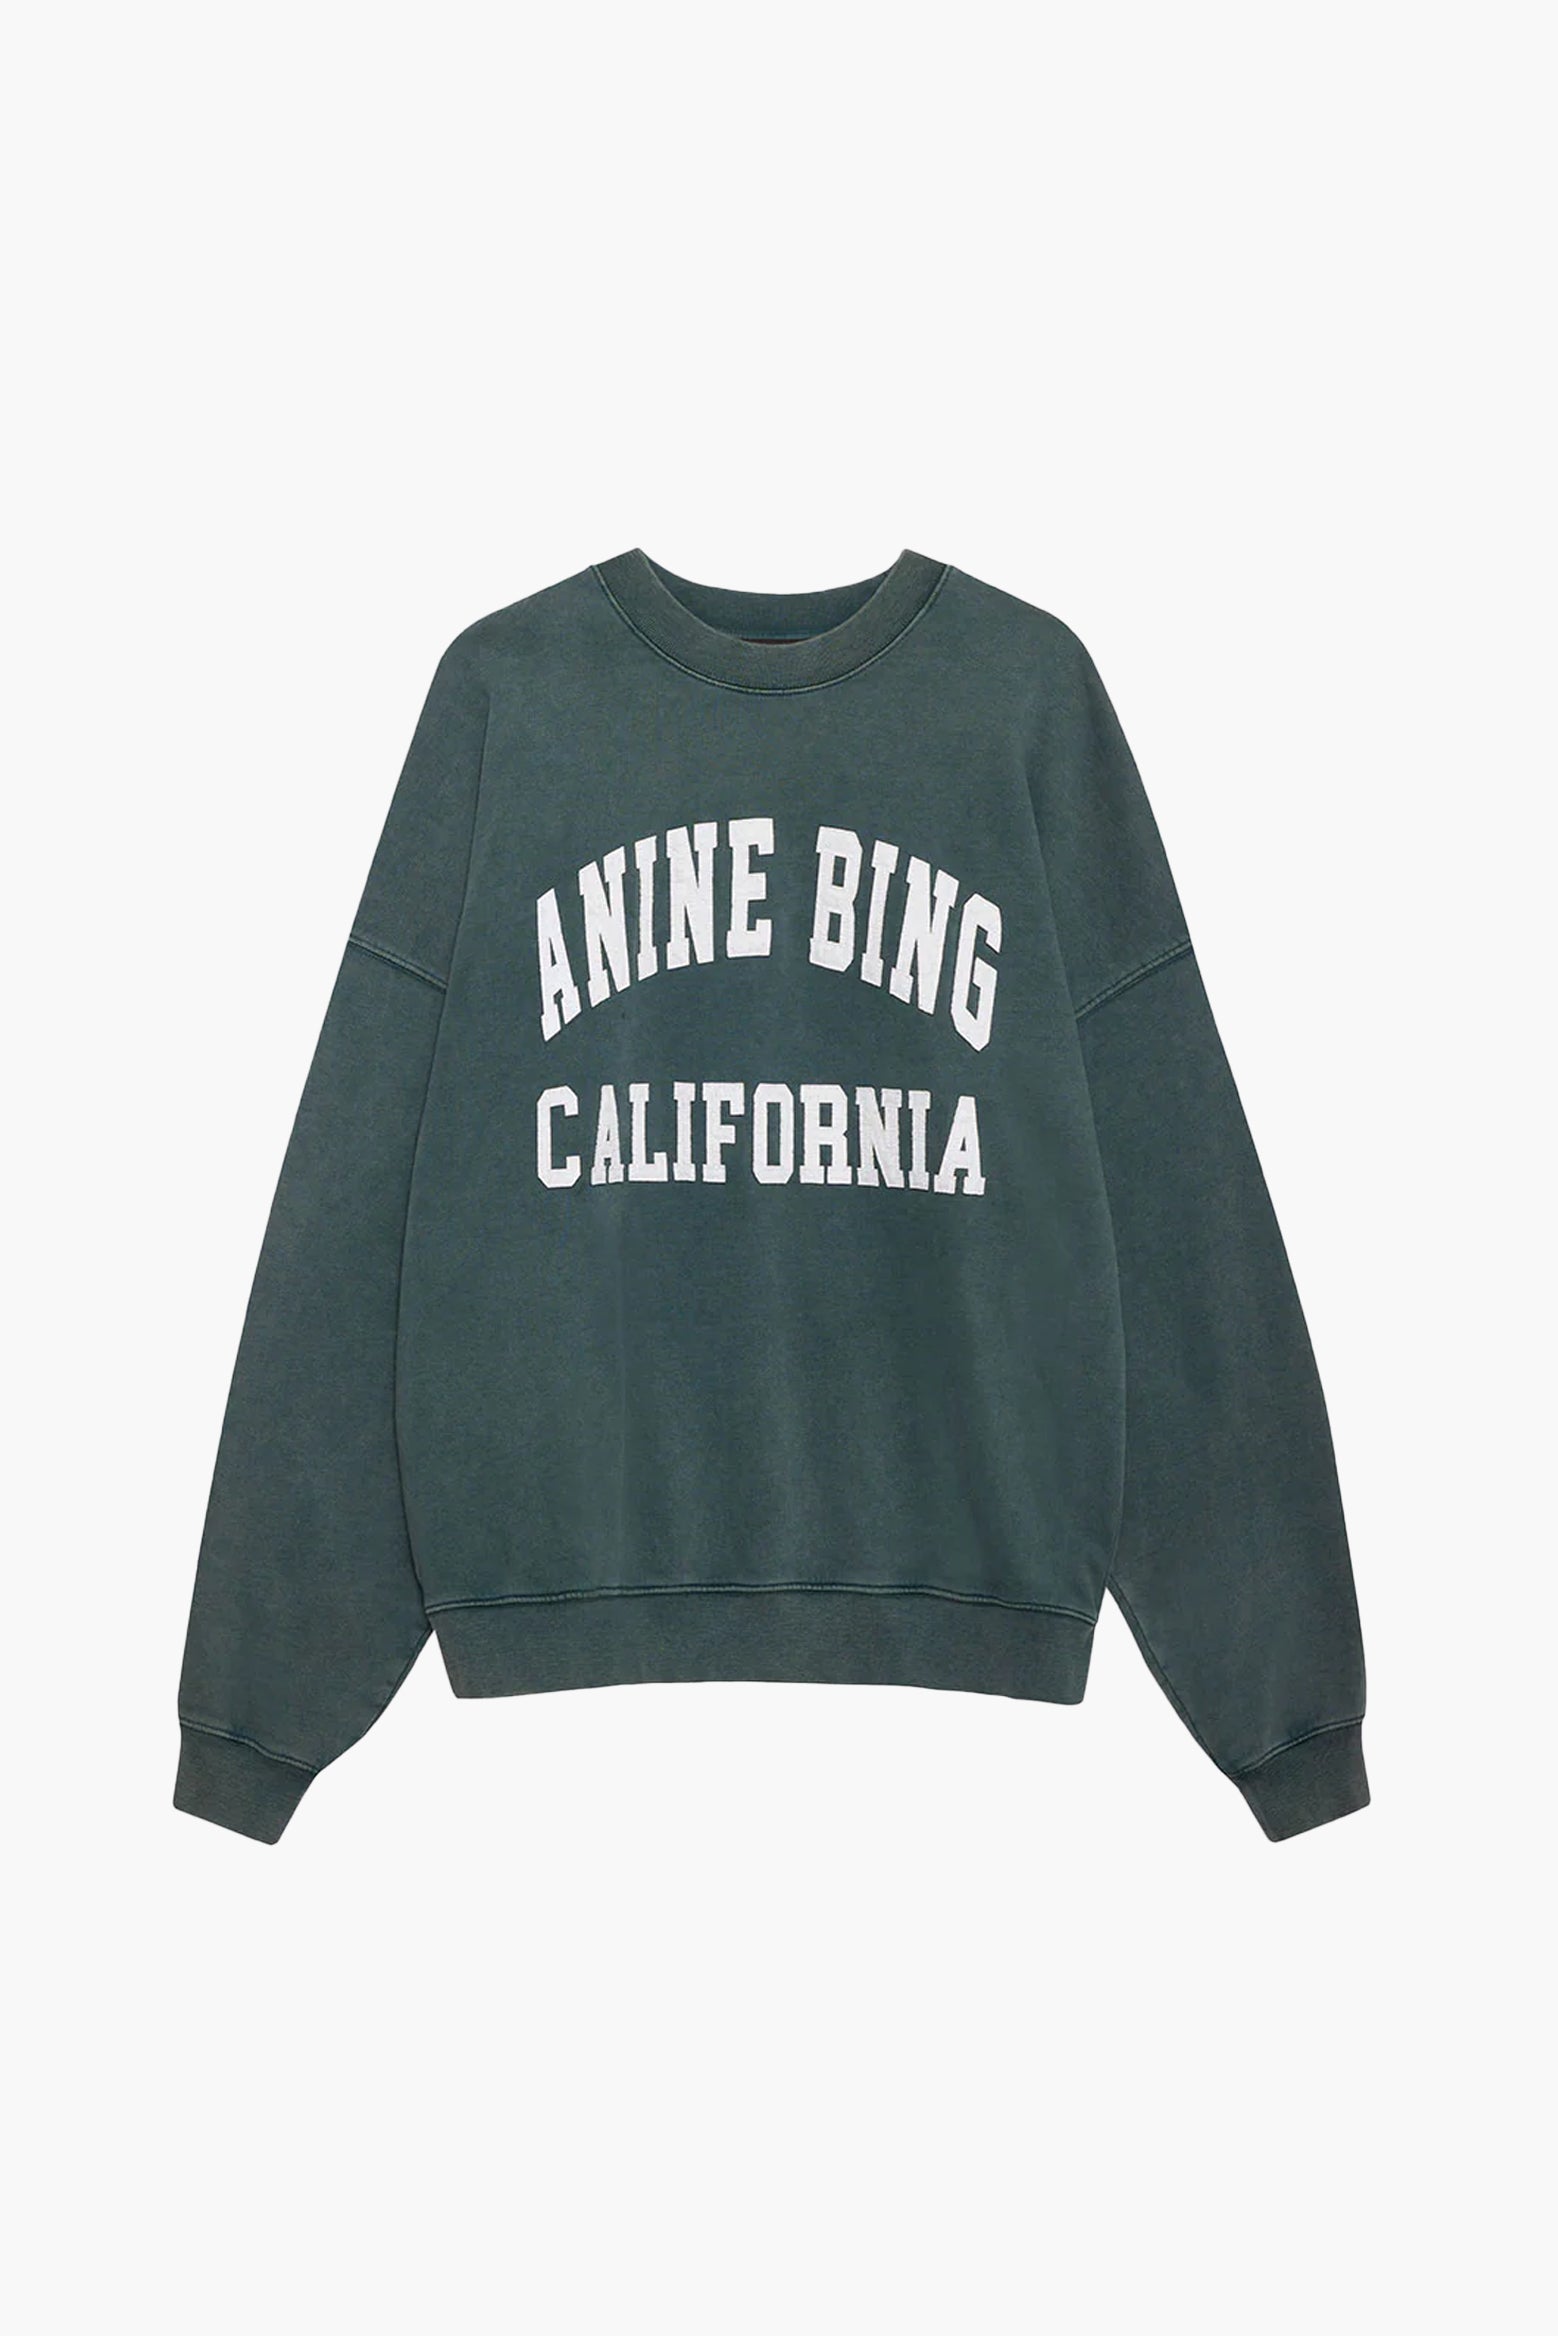 Anine Bing Miles Sweatshirt in Green available at The New Trend Australia. 